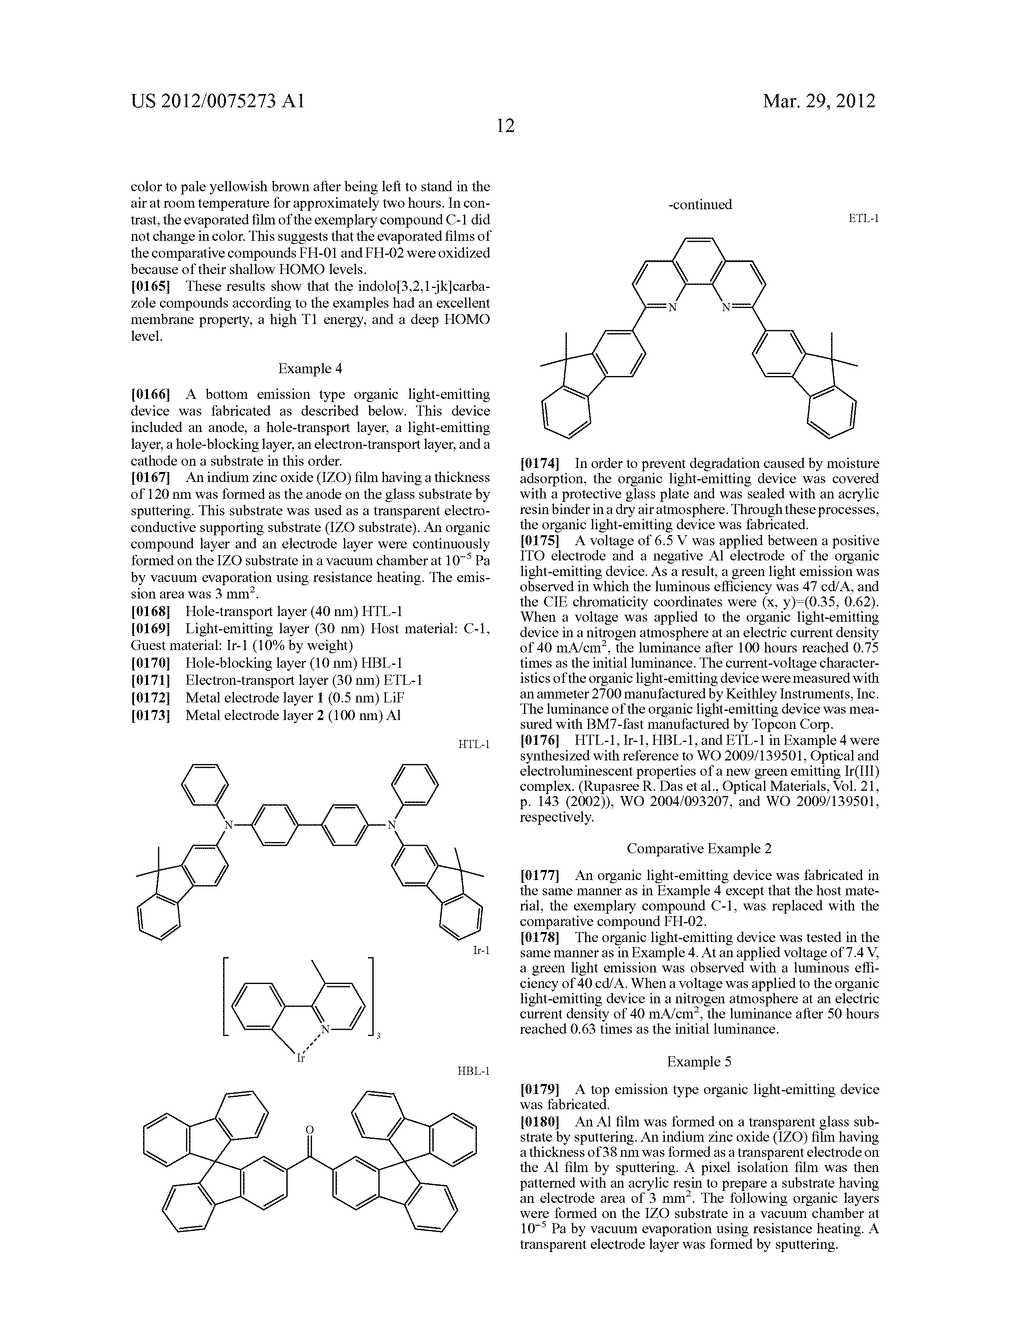 INDOLO[3,2,1-JK]CARBAZOLE COMPOUND AND ORGANIC LIGHT-EMITTING DEVICE     CONTAINING THE SAME - diagram, schematic, and image 14